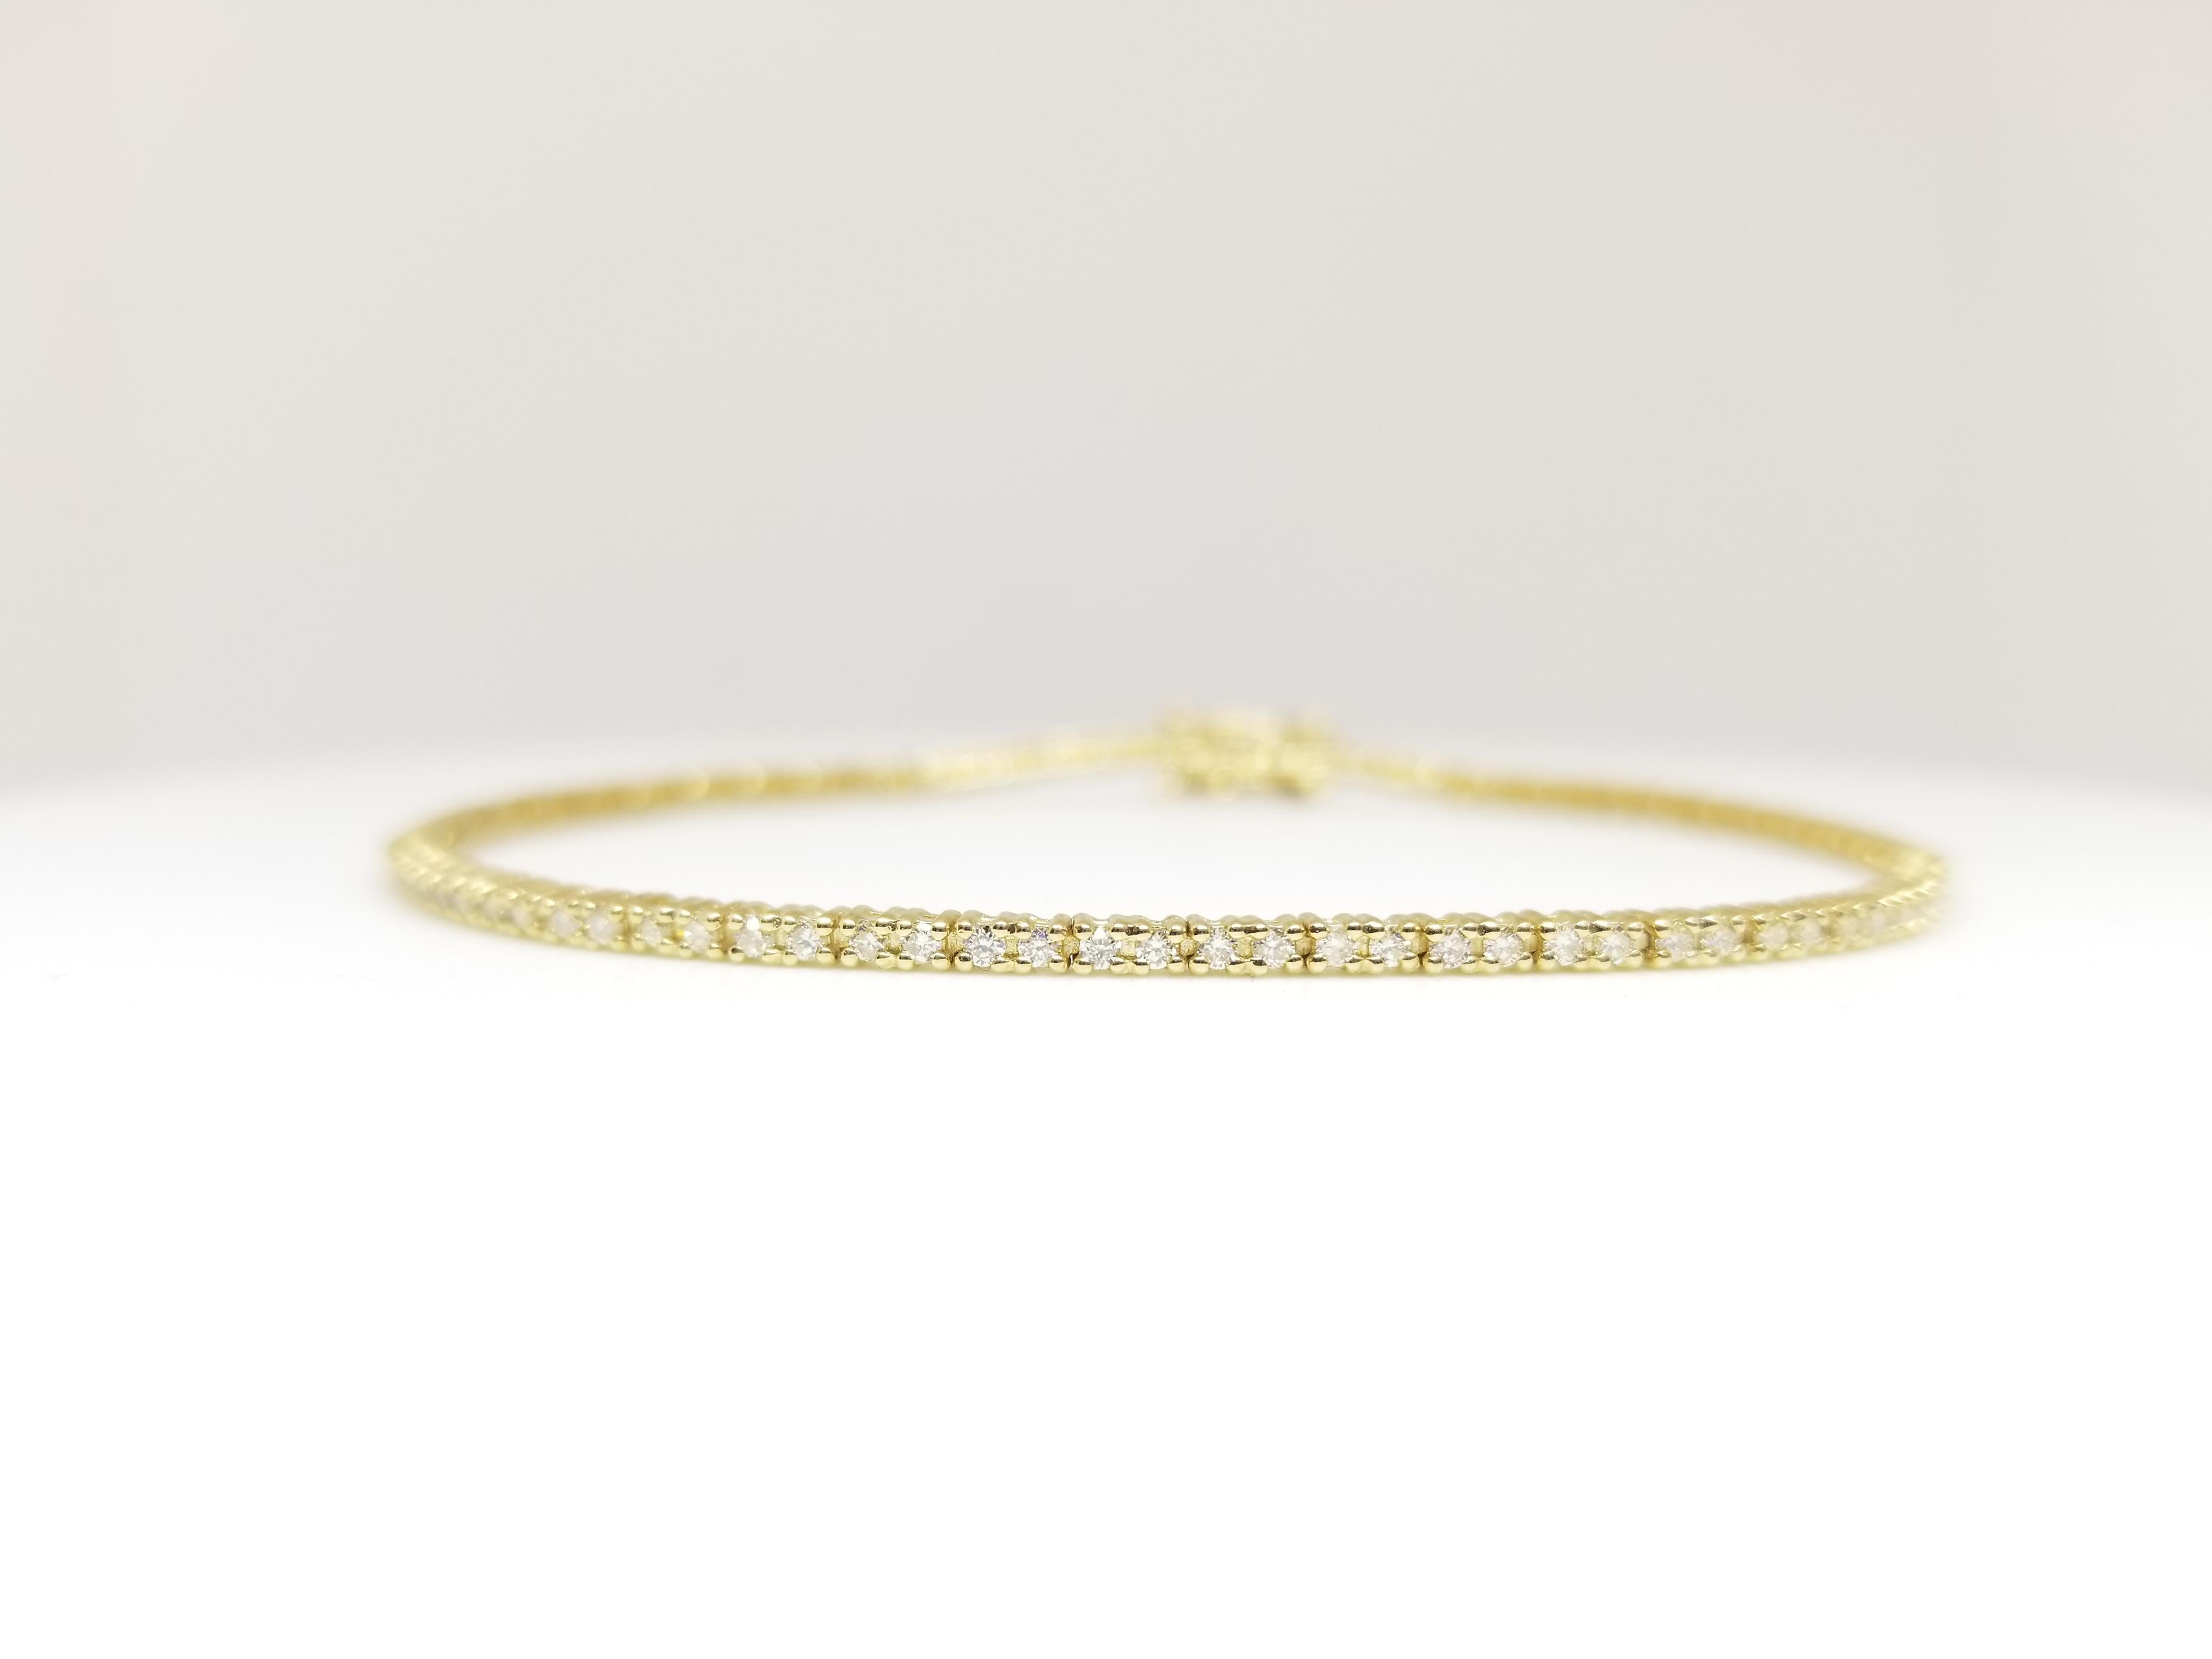 A quality tennis bracelet, containing 102 pcs of round-brilliant cut diamonds. set on 14k yellow gold. each stone is set in a classic four-prong style for maximum light brilliance. 7 inch length. Color I-J, Clarity SI3-I1.